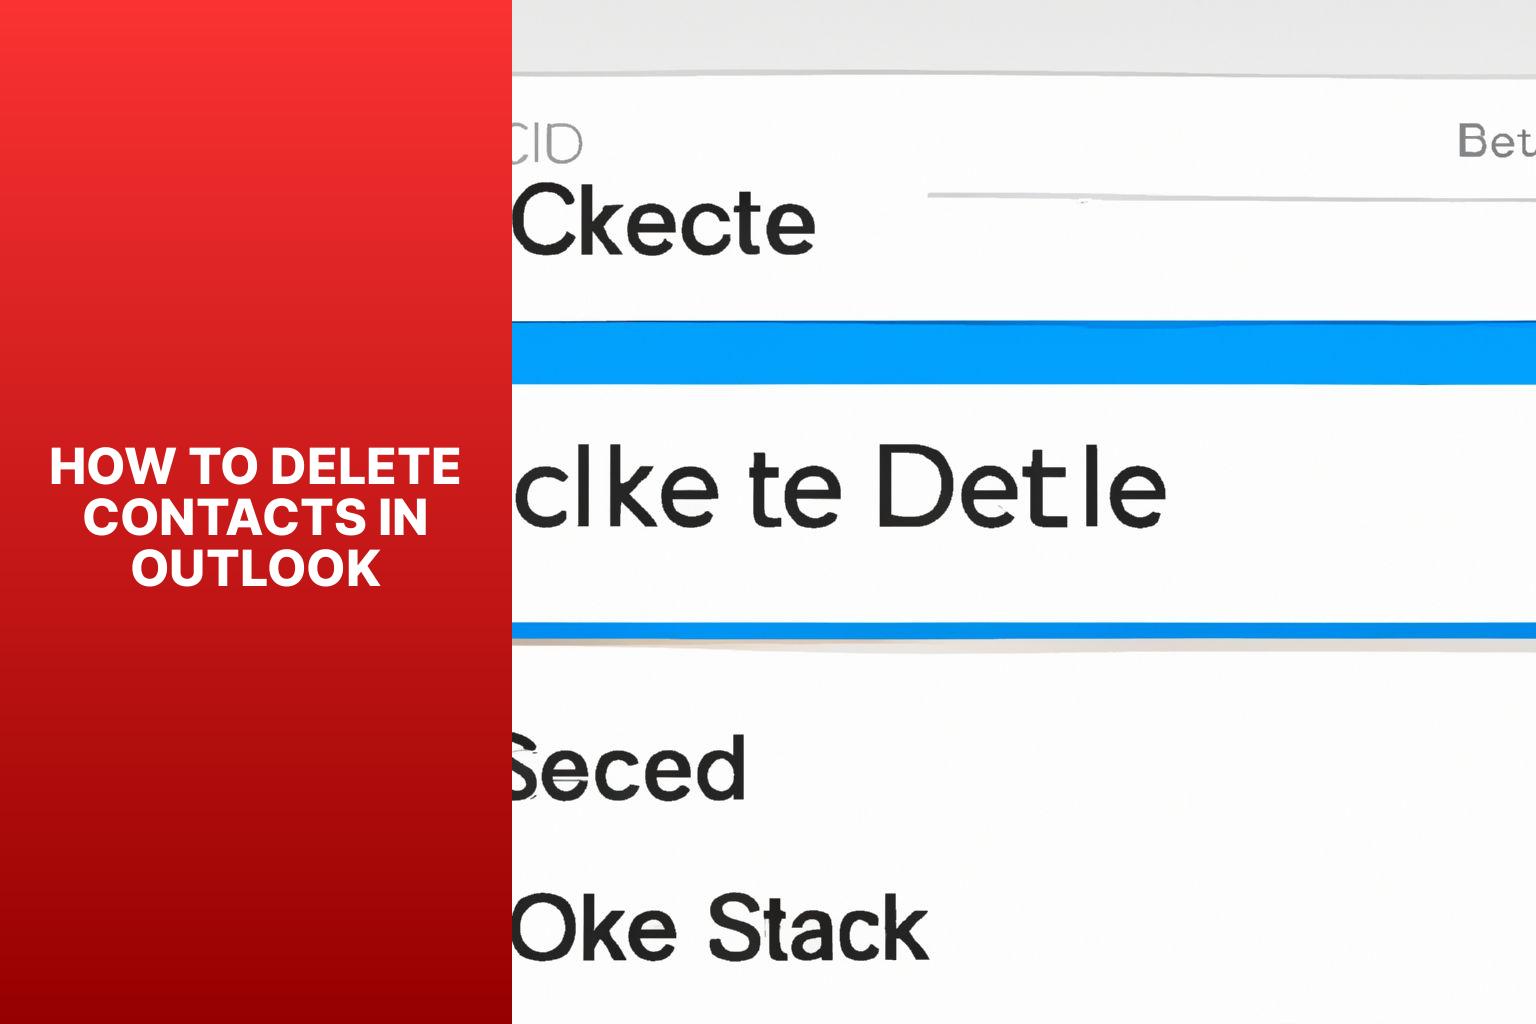 Delete outlook contacts how to delete contacts in outlookfgpa